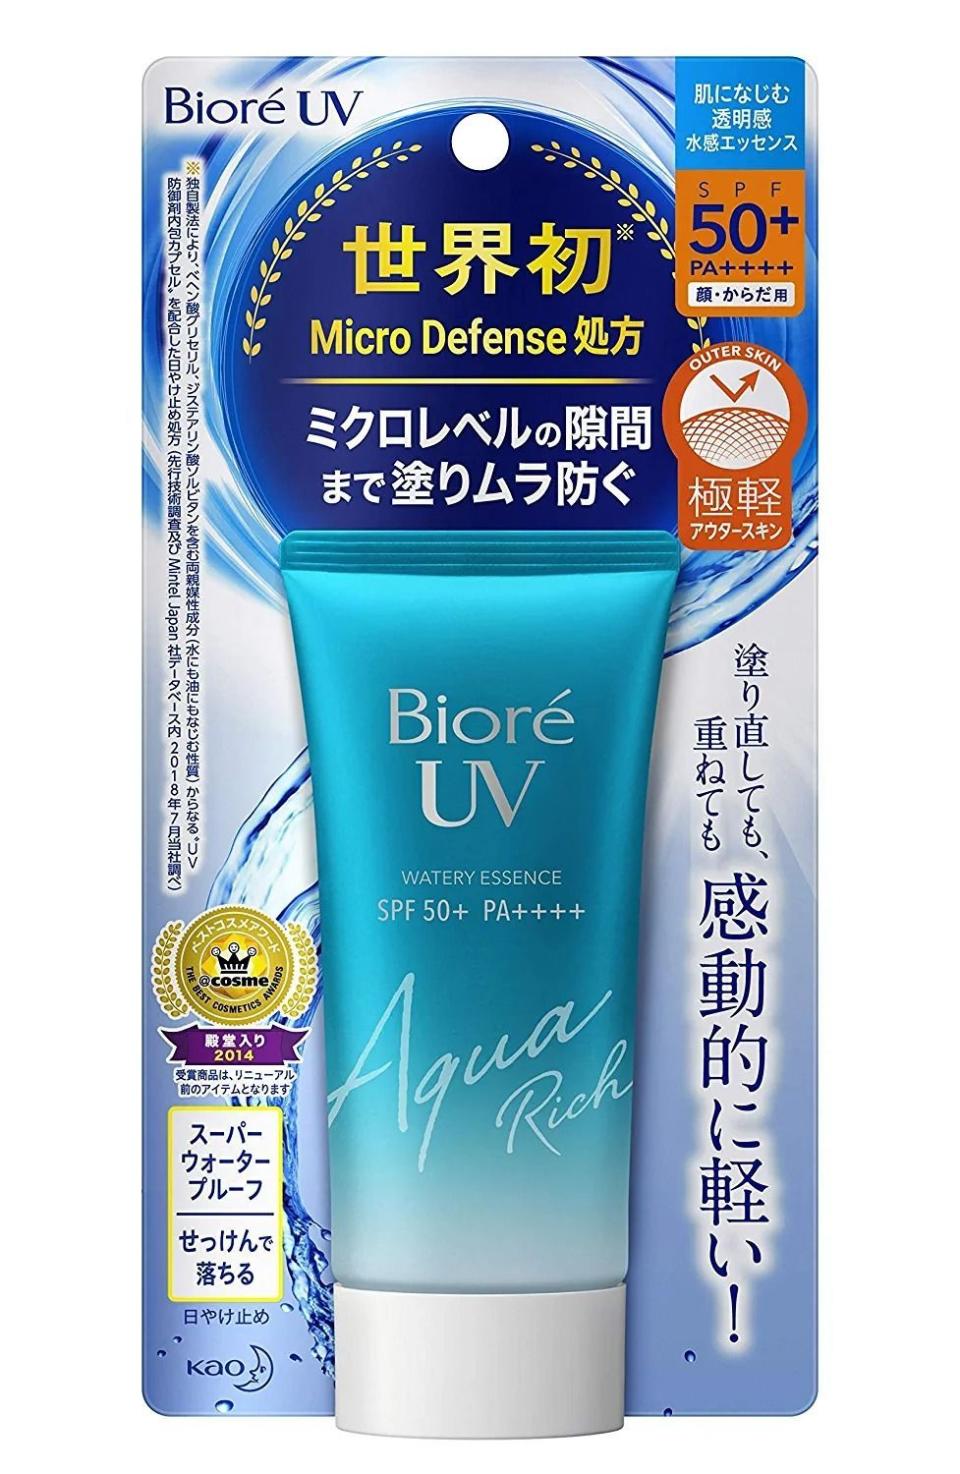 <p><strong>Bioré</strong></p><p>amazon.com</p><p><strong>$14.19</strong></p><p><a href="https://www.amazon.com/dp/B07NGP9F4H?tag=syn-yahoo-20&ascsubtag=%5Bartid%7C10056.g.42433226%5Bsrc%7Cyahoo-us" rel="nofollow noopener" target="_blank" data-ylk="slk:Shop Now" class="link ">Shop Now</a></p><p>Fu finds sunscreen to be the most challenging category to formulate. “From packaging issues to puzzling SPF test results, there are a whole host of challenges that come with this category,” she says. </p><p>But sunscreens formulated in Asia are especially great, because chemists can use a much wider range of ingredients for better textures. This Bioré SPF is one of her very favorites. “The Aqua Protect Lotion is a beautiful fluid that doesn’t dry out skin (a common trait of fluid sunscreens) and layers well under my makeup,” she says. “A lovely texture and robust sunscreen!”</p>